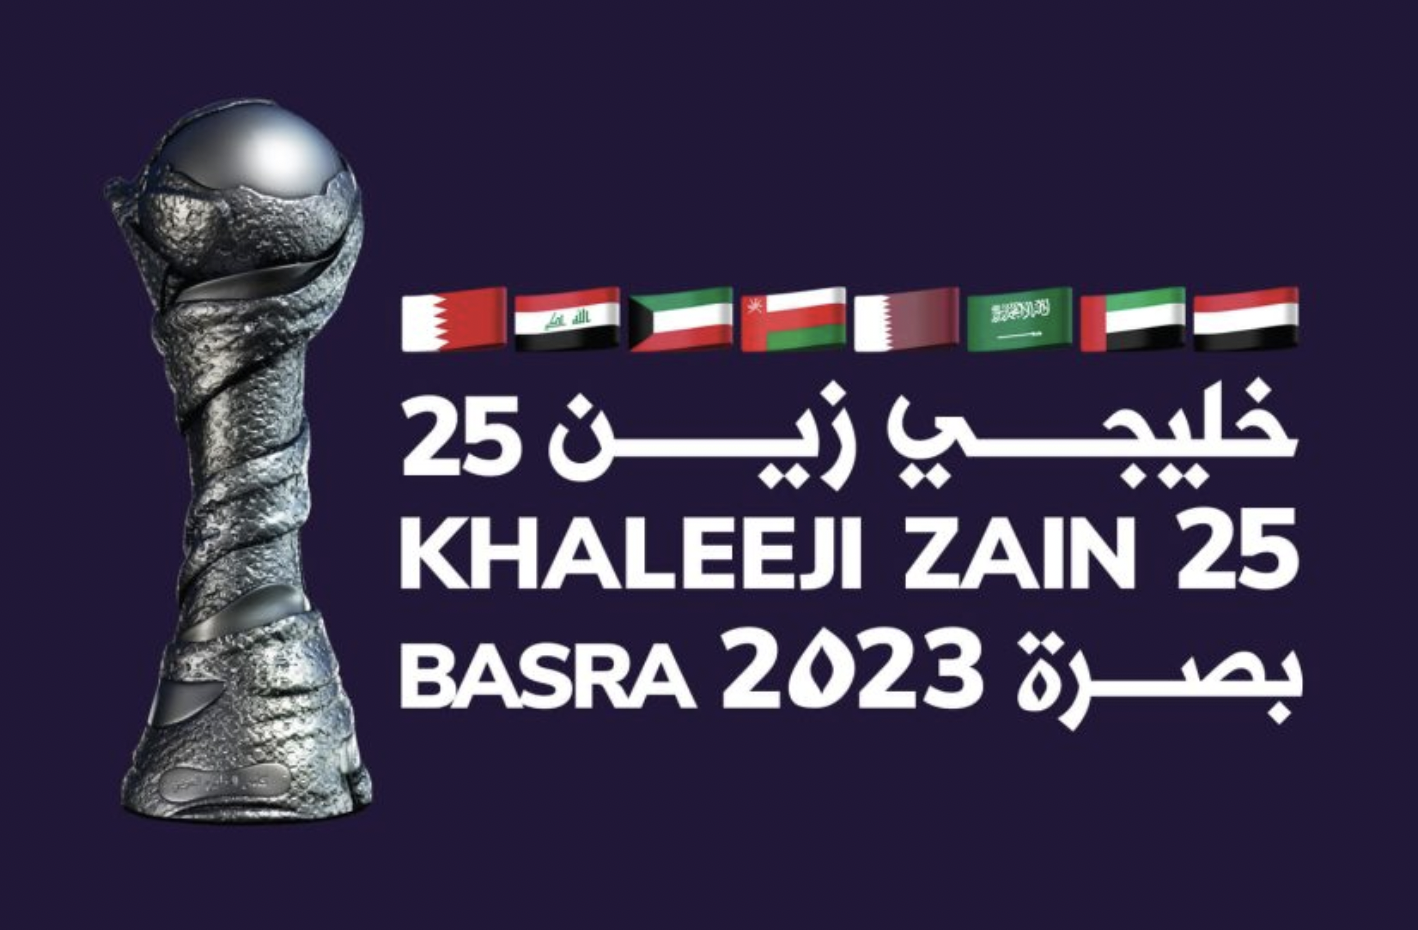 Arabian Gulf Cup ready for Iraq kickoff with new sponsor Zain dialling